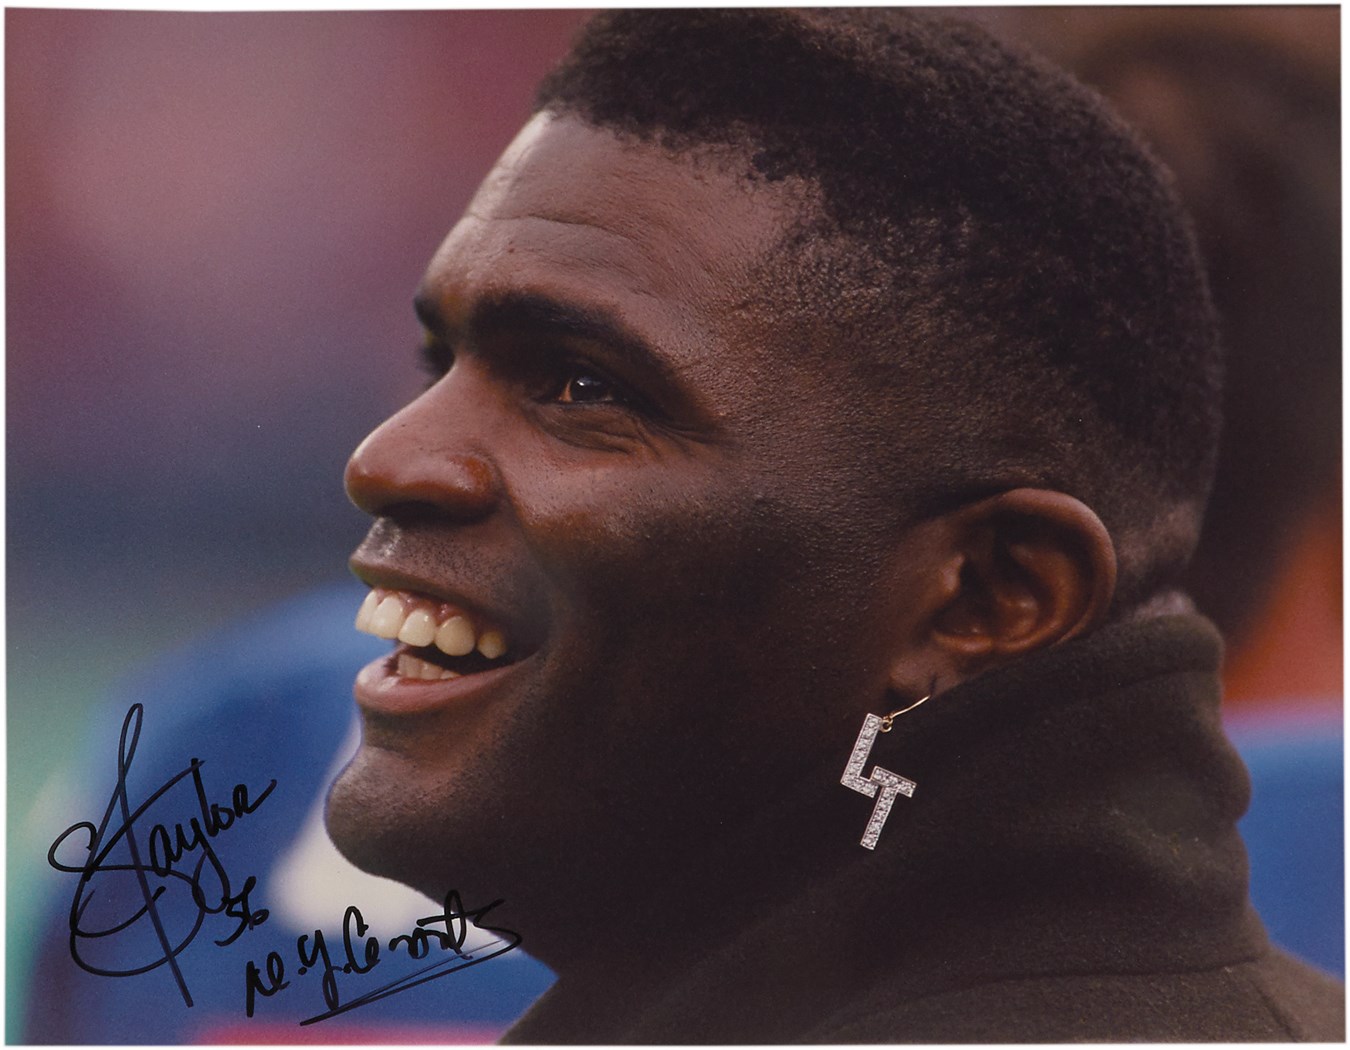 Exemplary Lawrence Taylor 16x20” In Person Signed Photograph from VIP Photographer Richard Brightly